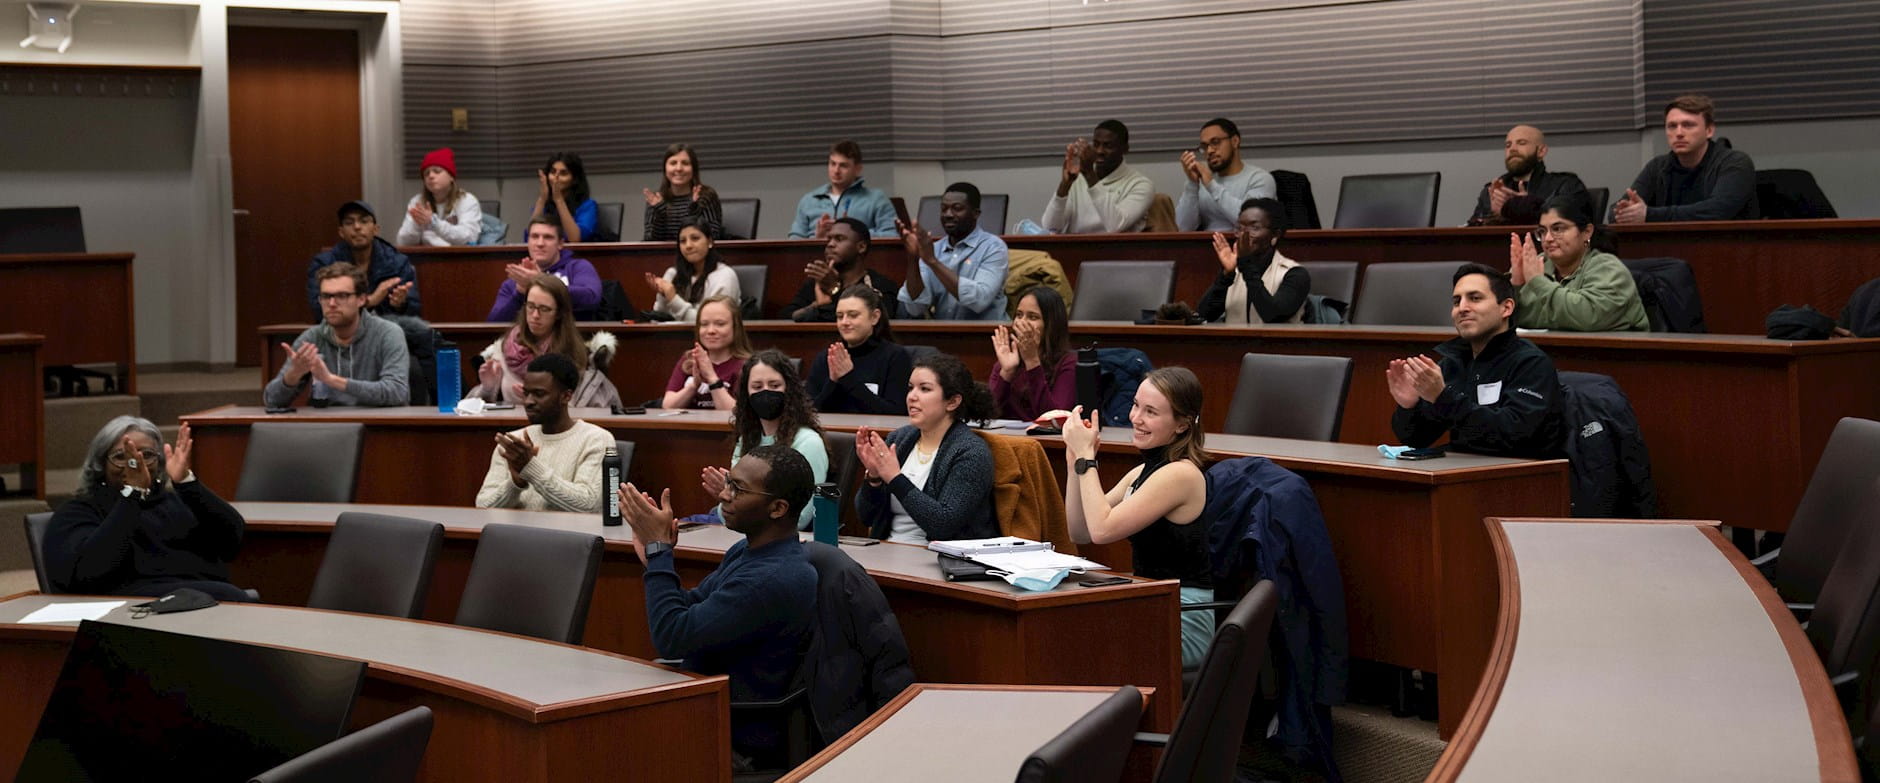 The audience applauds during Ghian Foreman's keynote - Chicago Booth Diversity Week, 2022